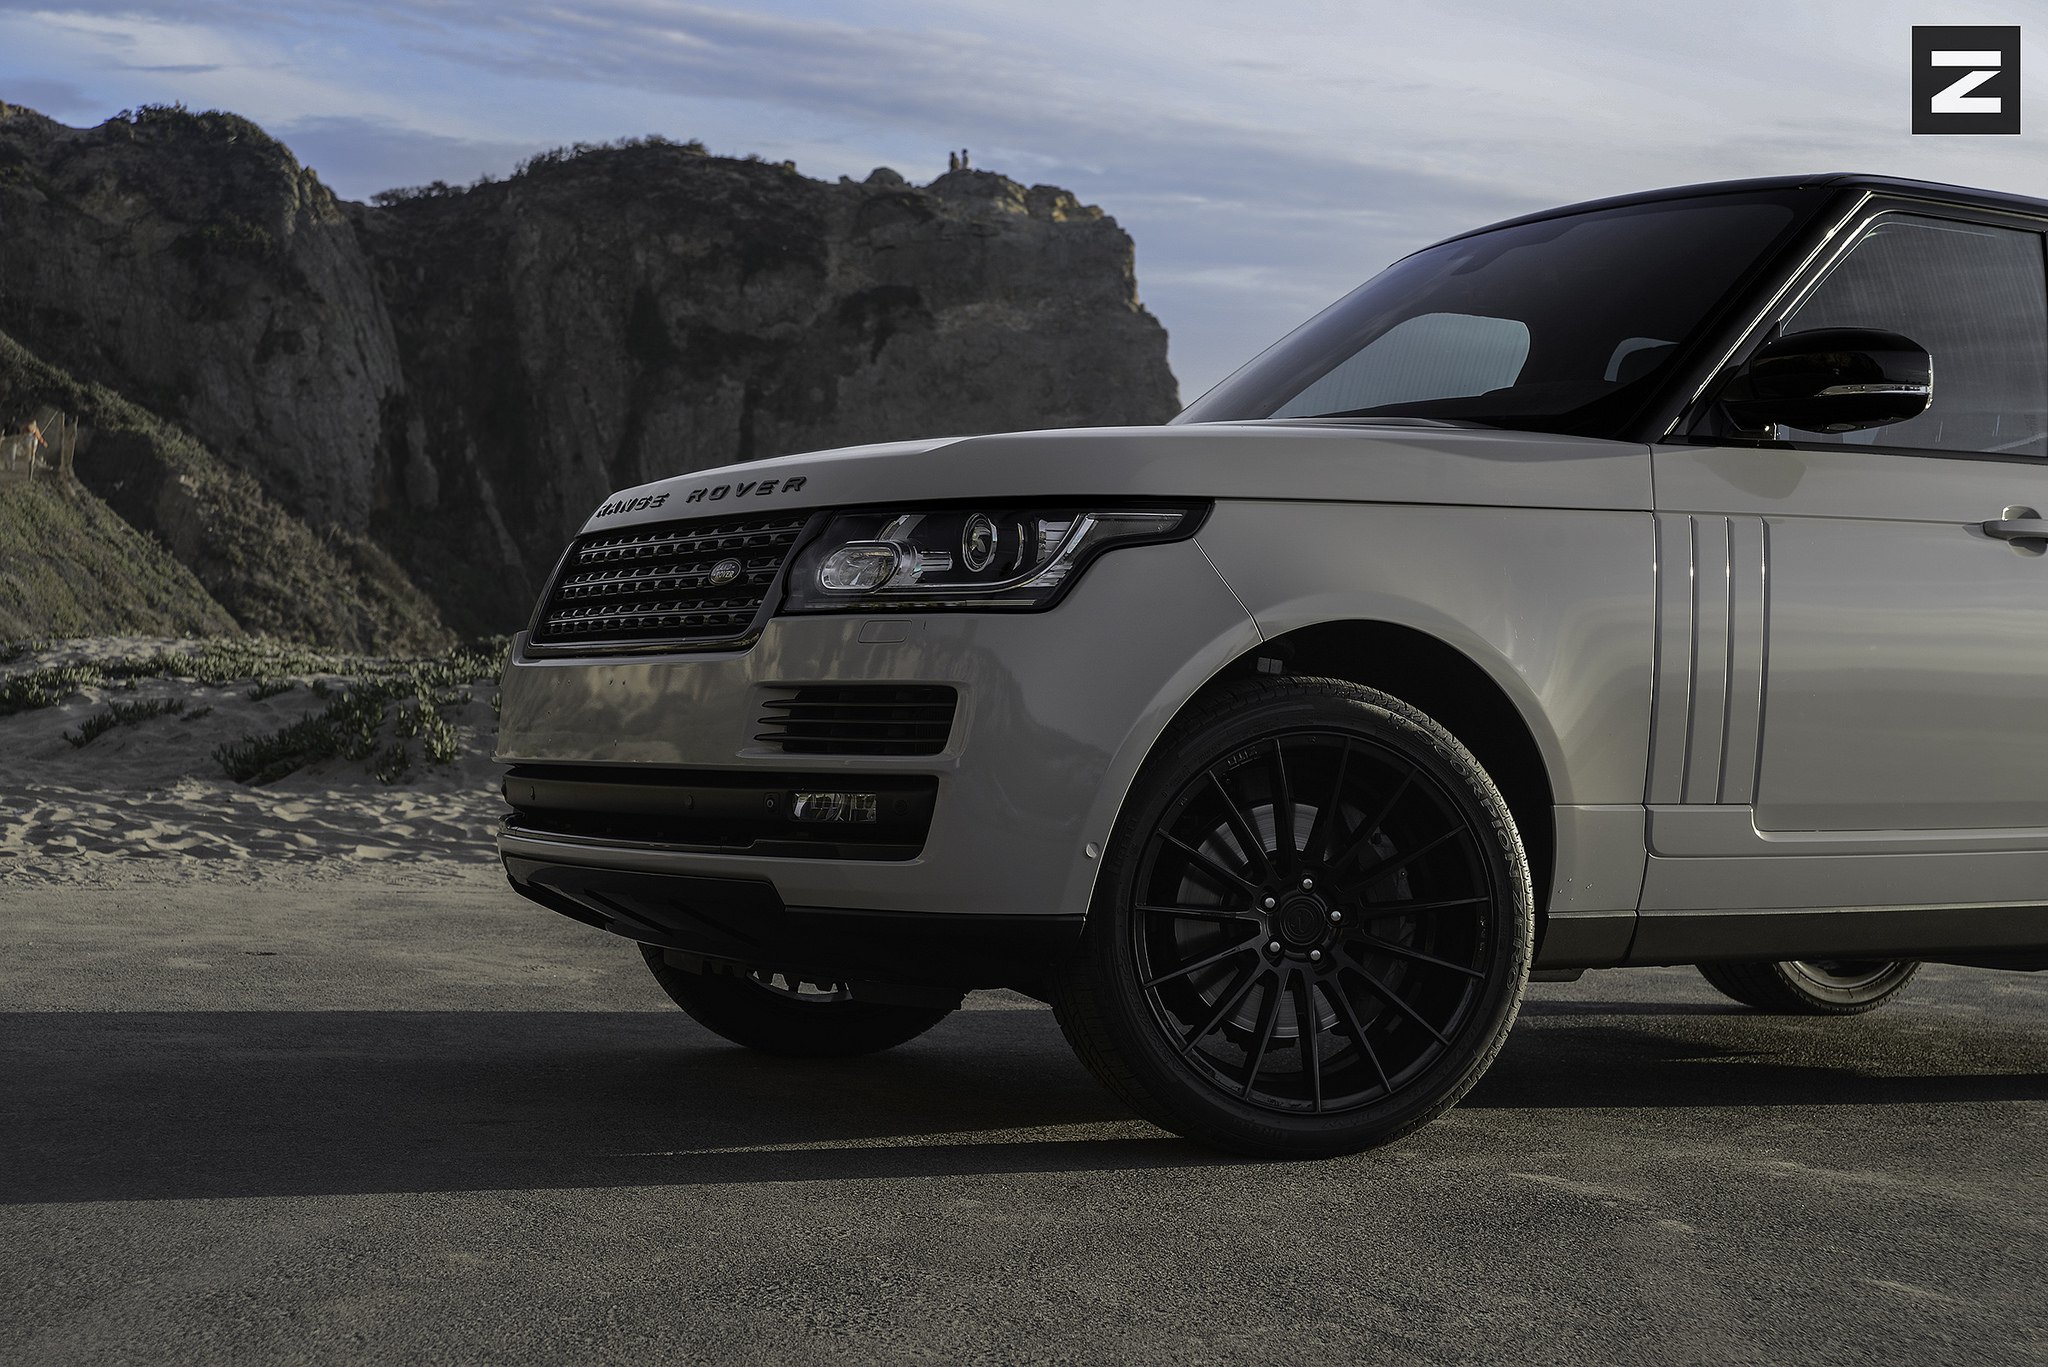 Aftermarket Headlights on White Range Rover - Photo by Zito Wheels